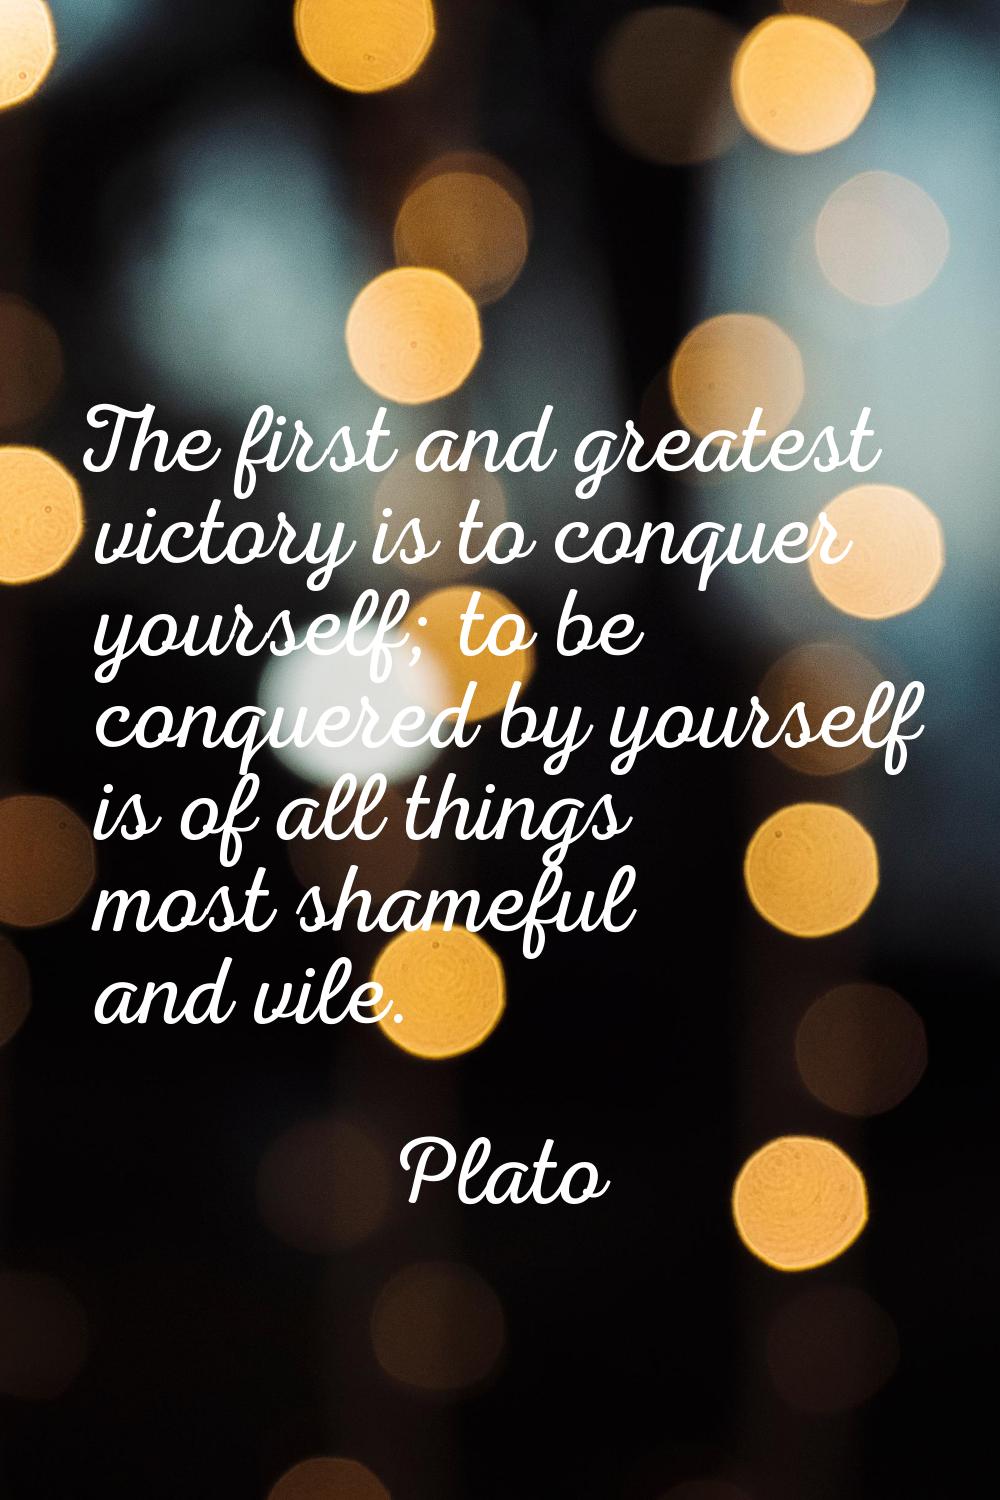 The first and greatest victory is to conquer yourself; to be conquered by yourself is of all things